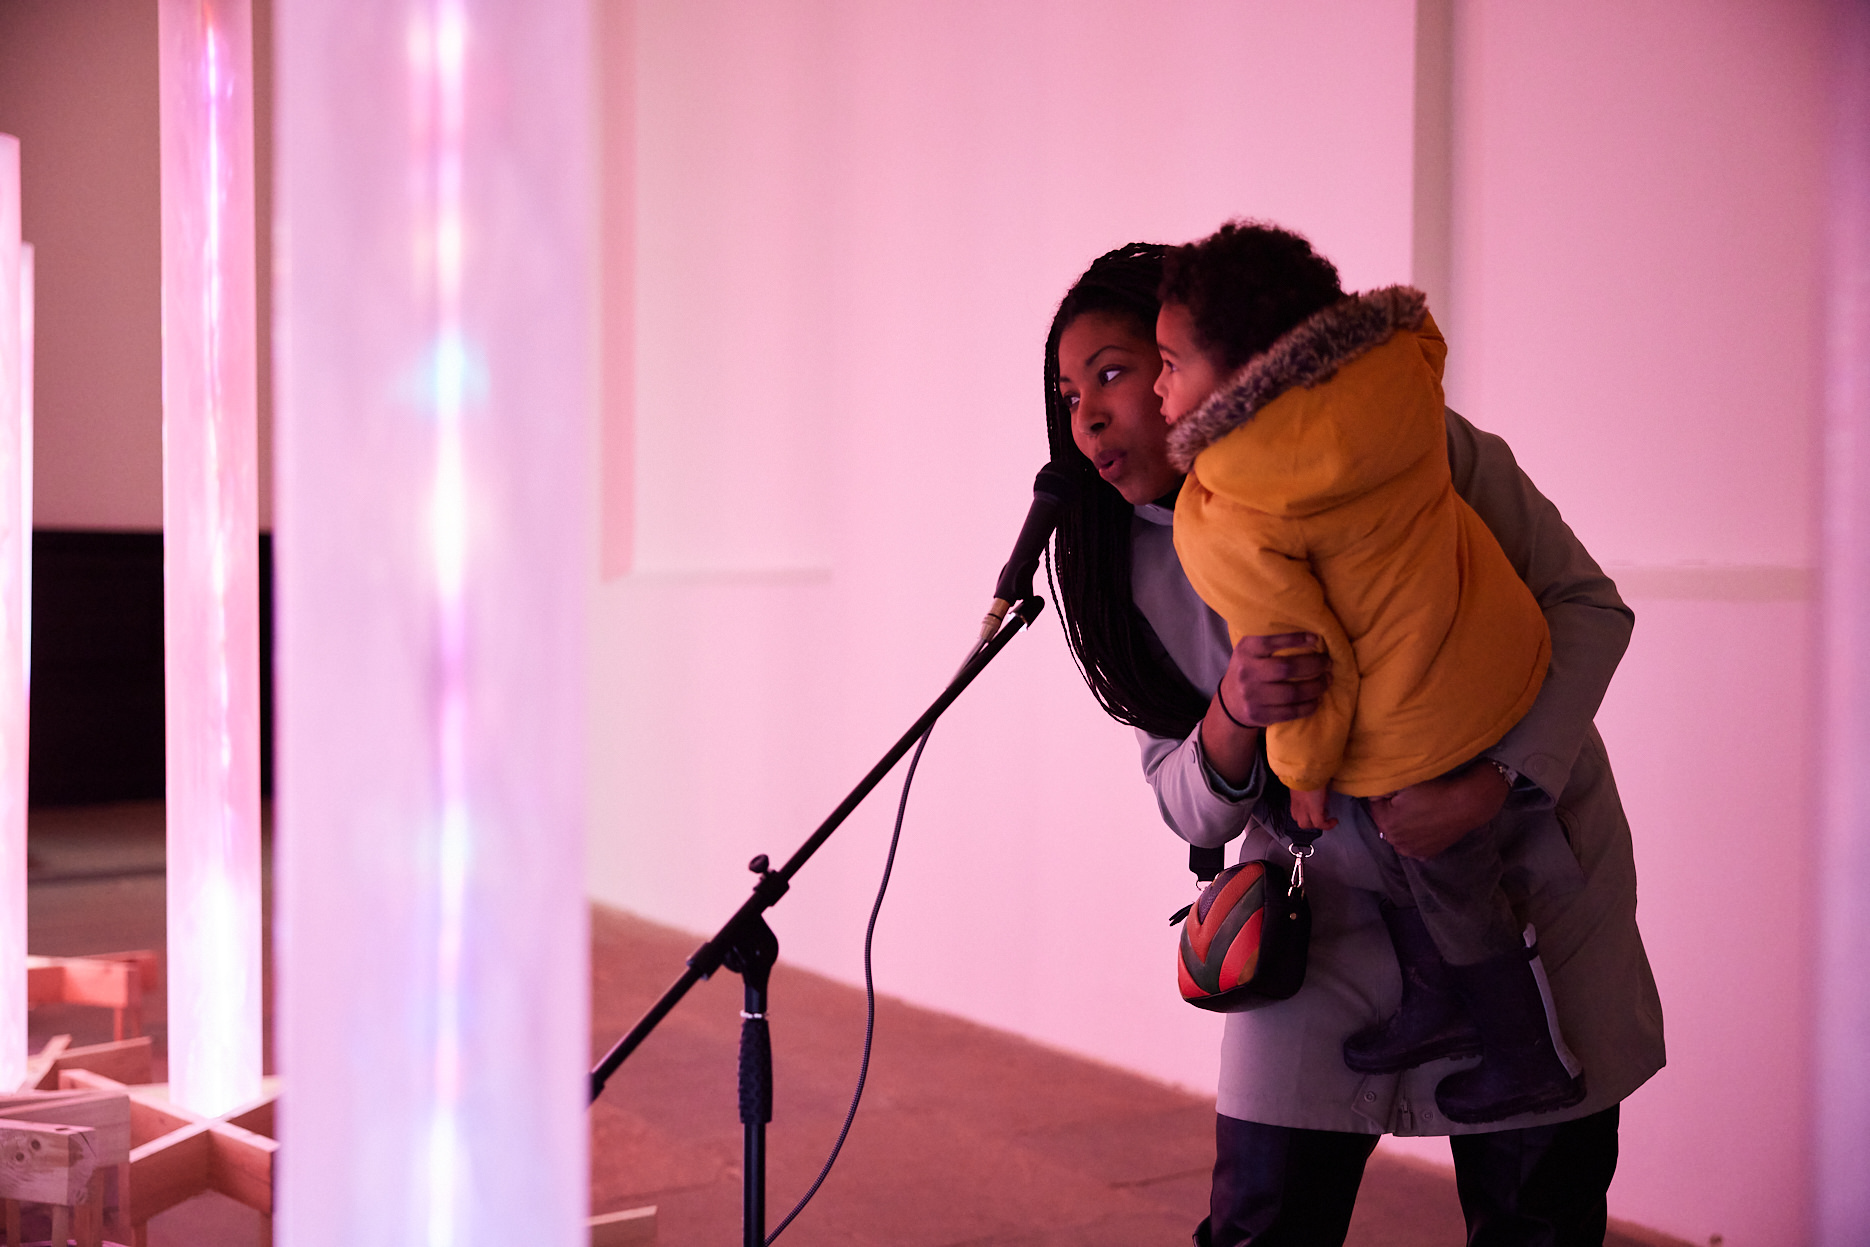 An adult holding a toddler, singing into a microphone surrounded by glowing columns.